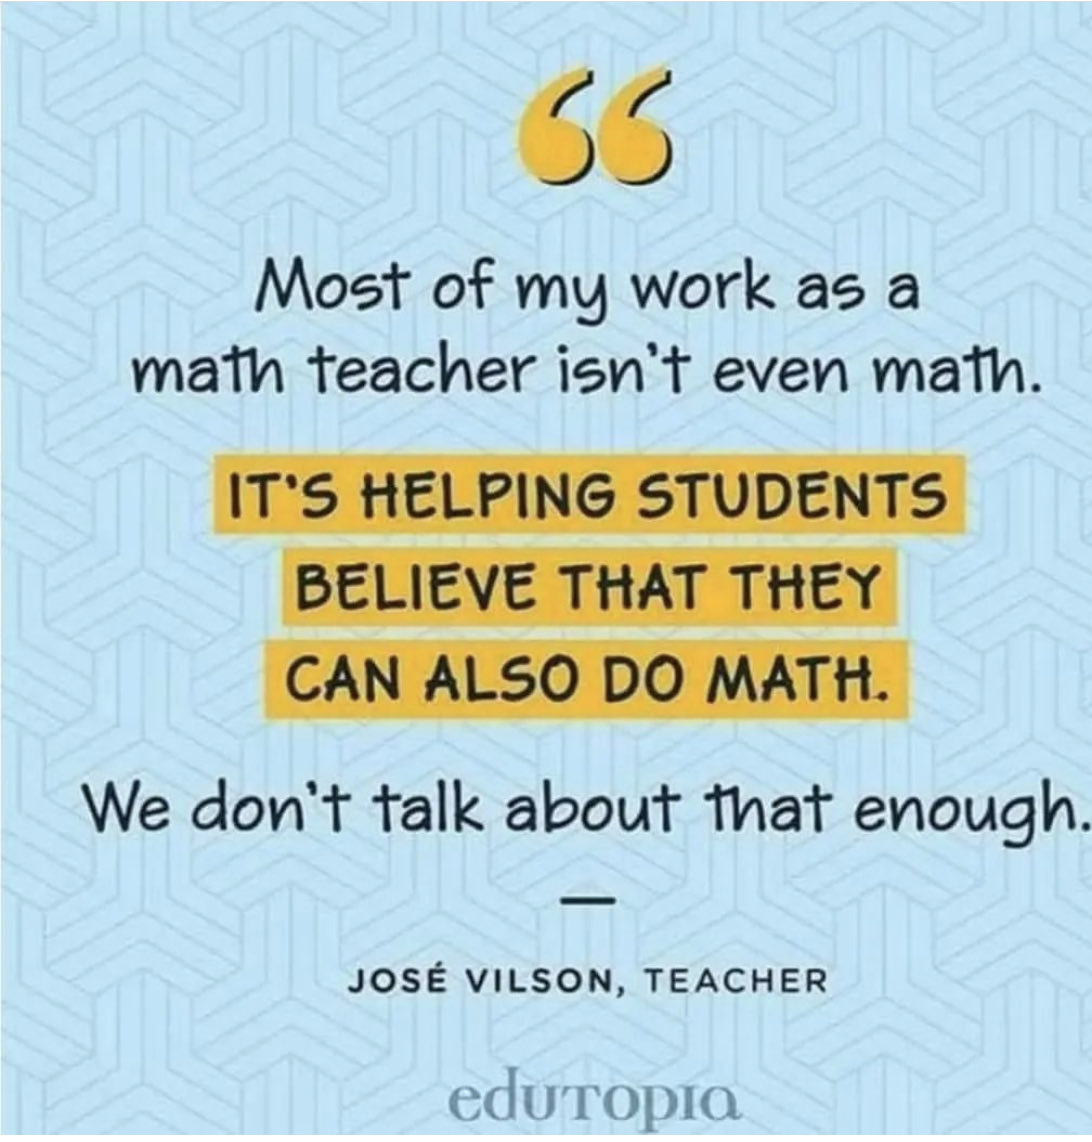 Building students’ confidence in math goes a long way in helping them be successful!
#EveryoneIsAMathPerson